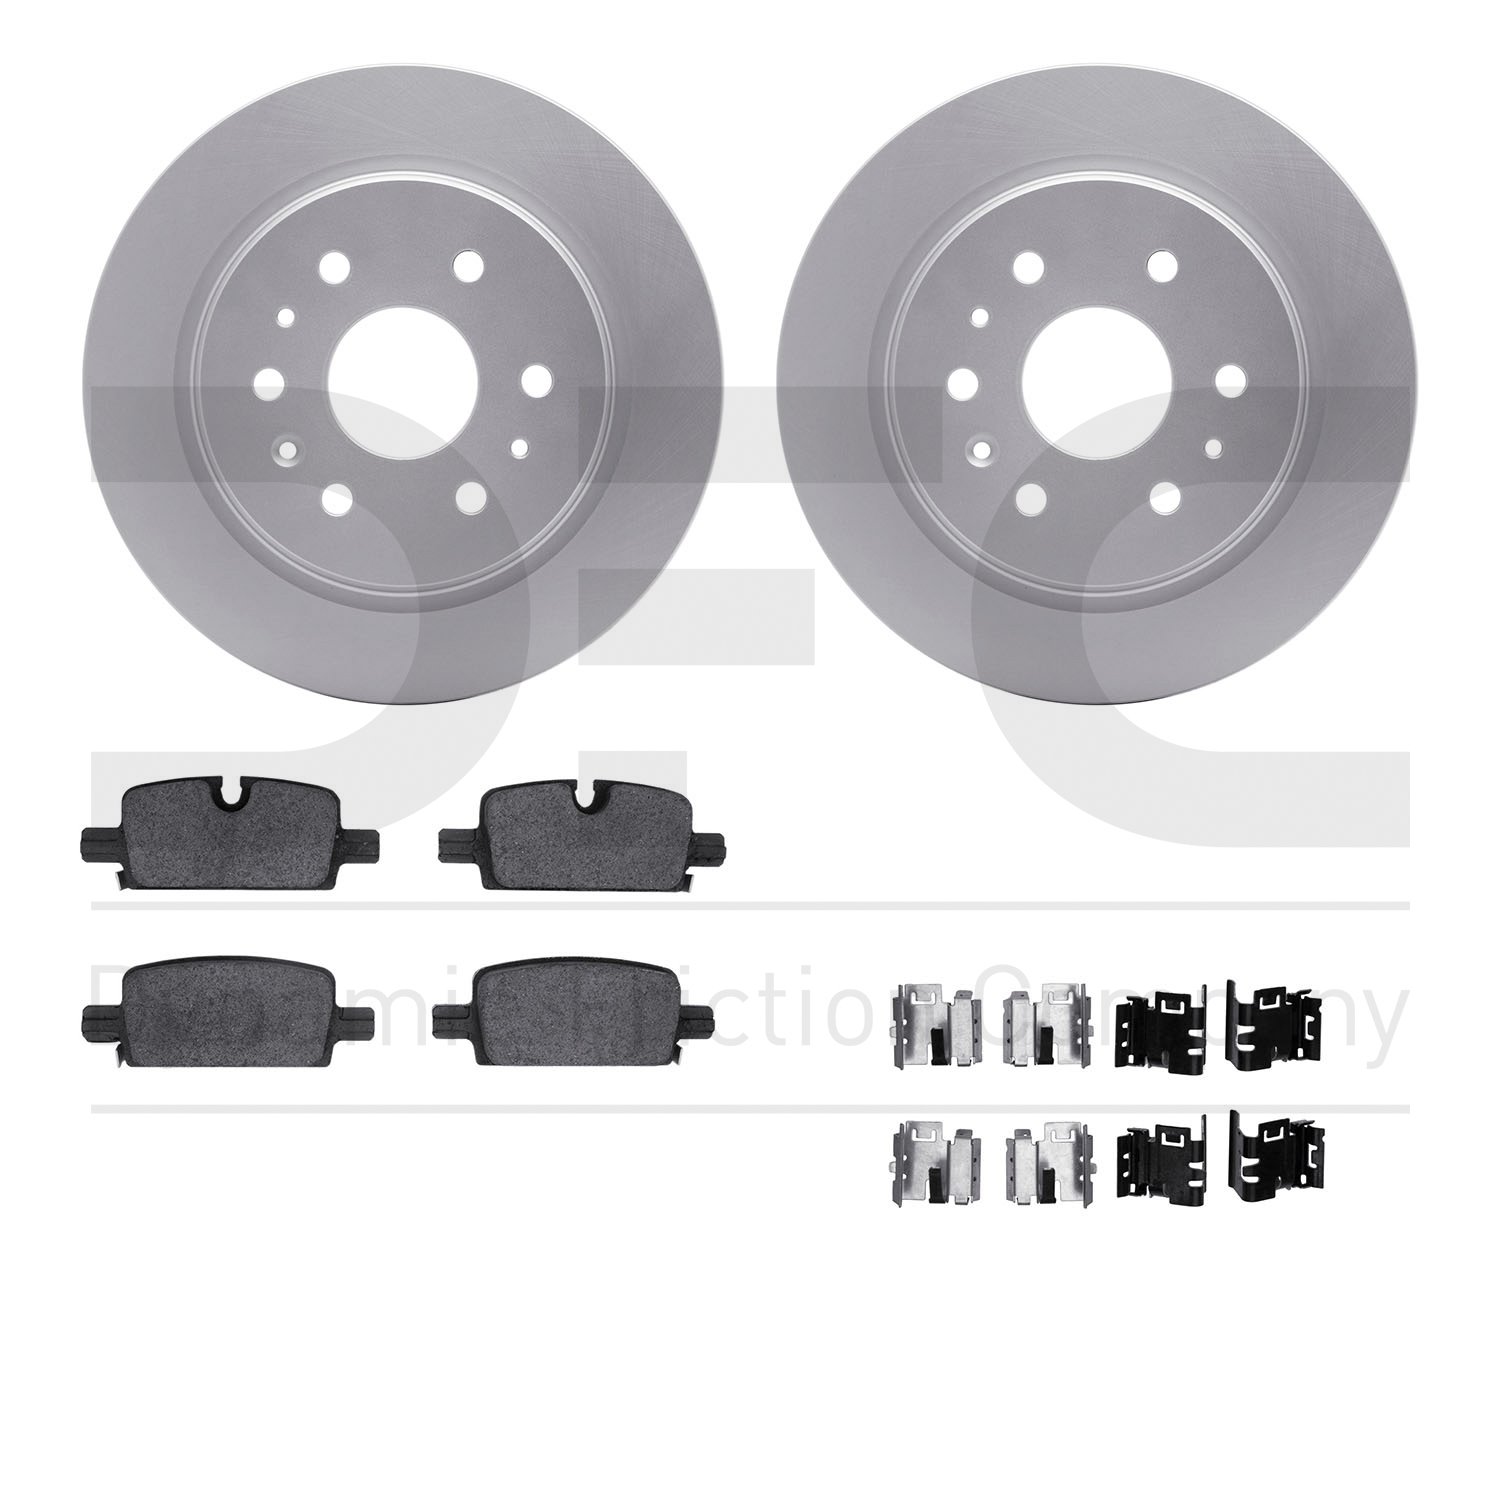 4412-47011 Geospec Brake Rotors with Ultimate-Duty Brake Pads & Hardware, Fits Select GM, Position: Rear